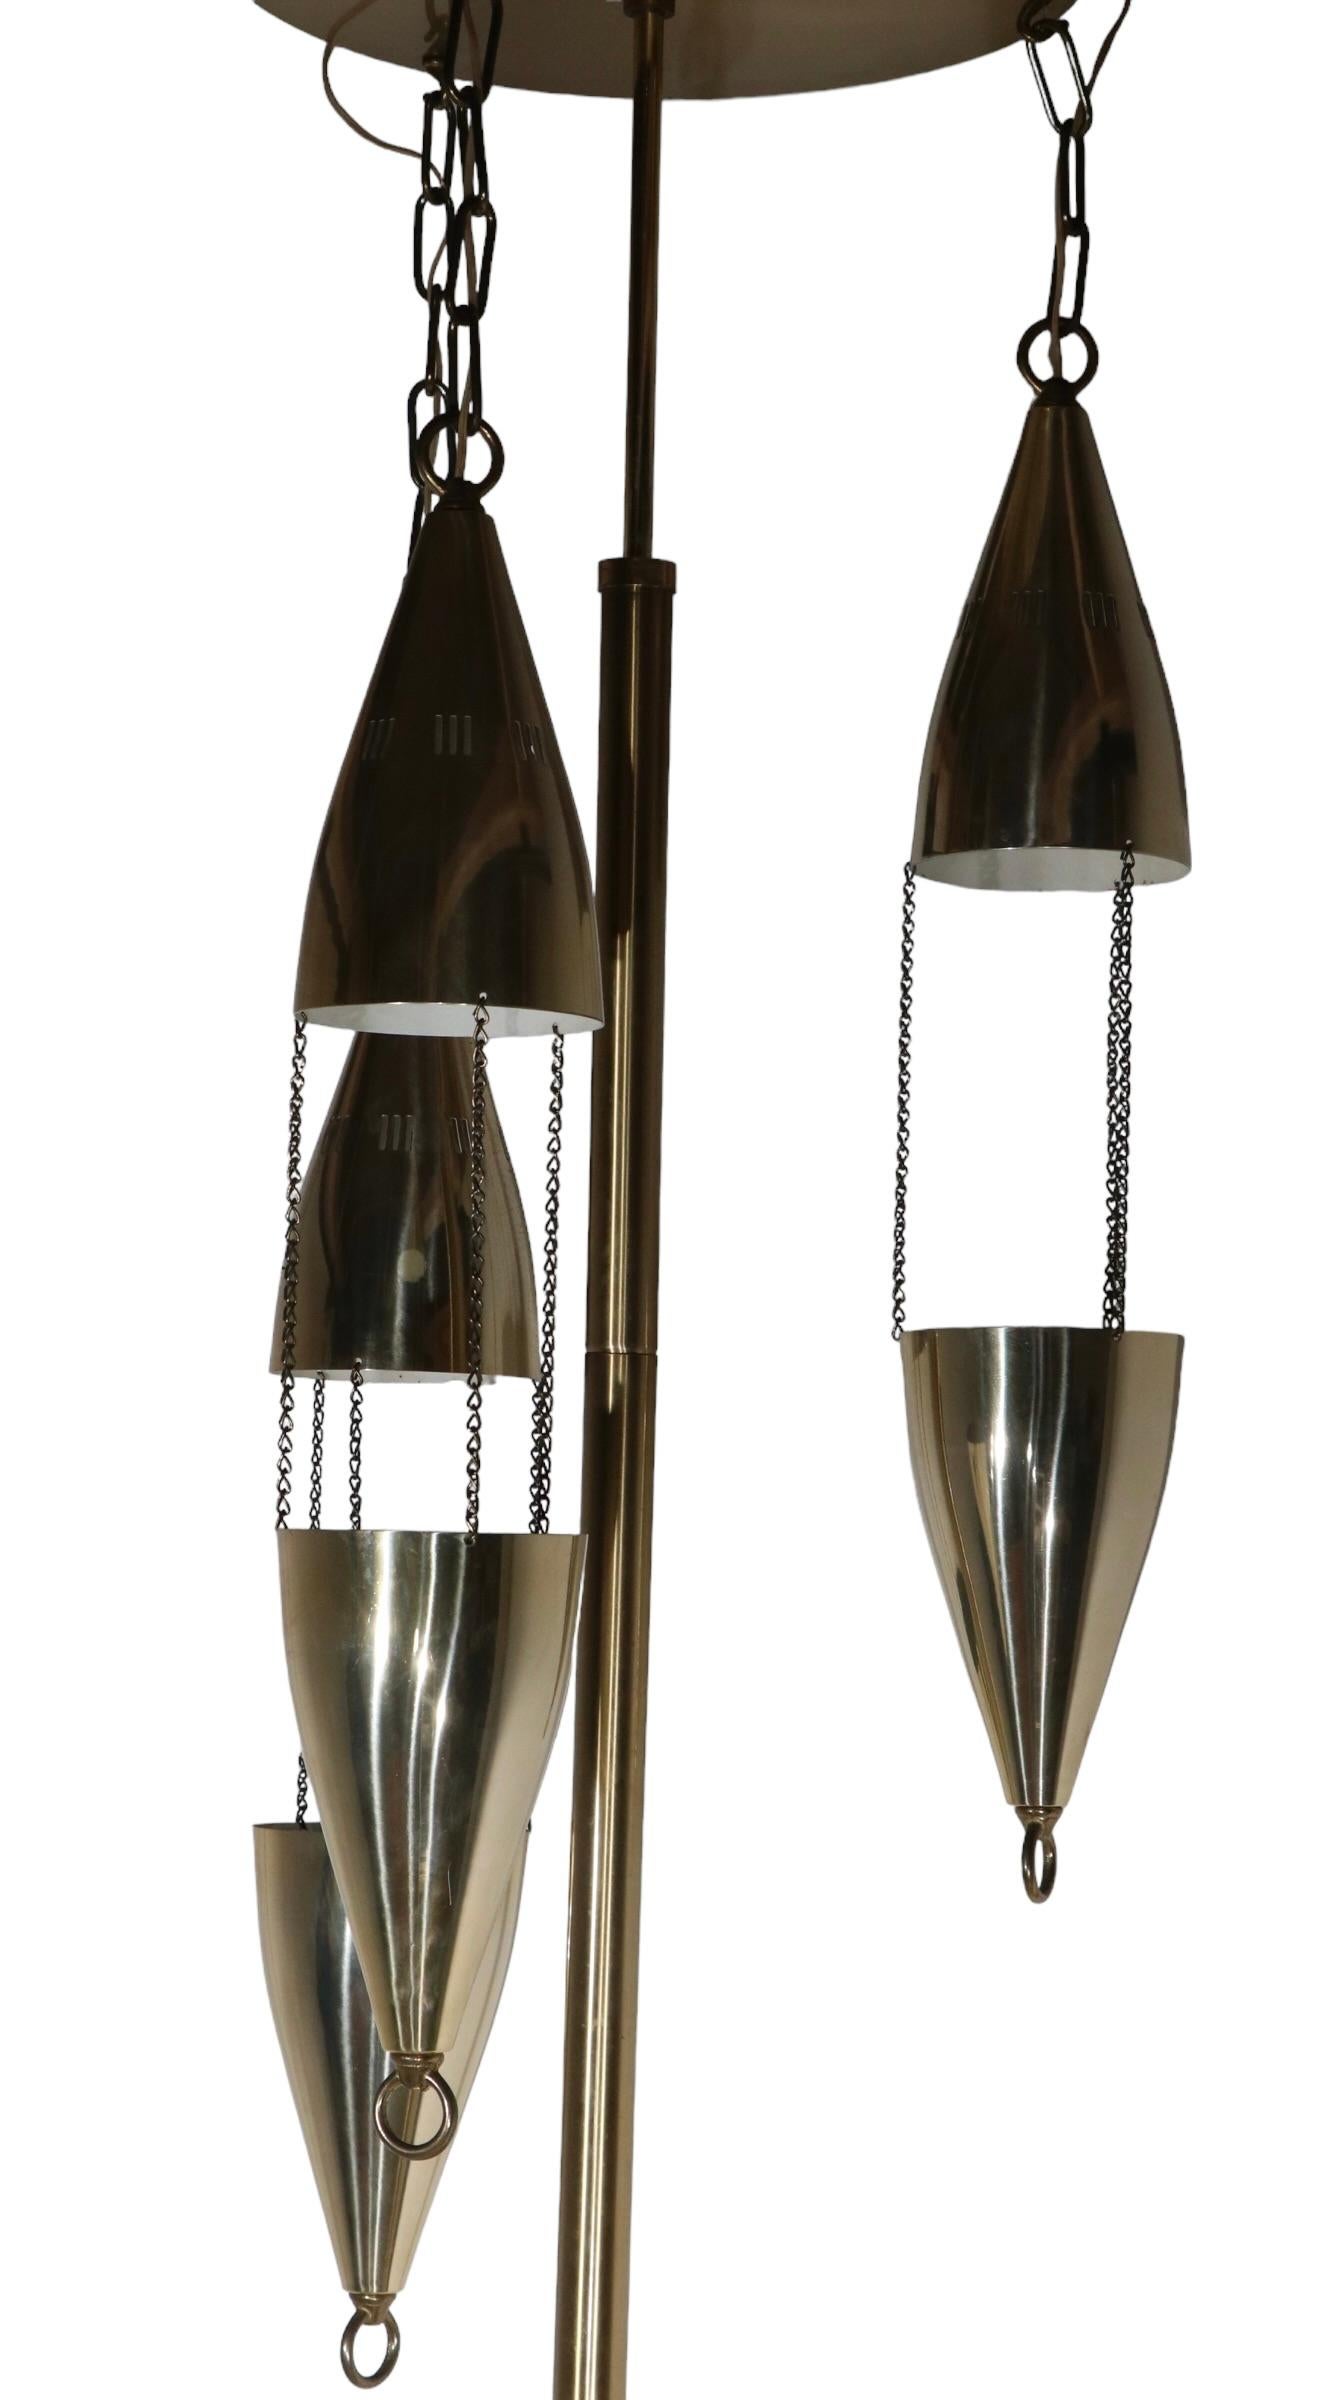 Architectural Mid Century Tension Pole Lamp c 1950- 1960's 2